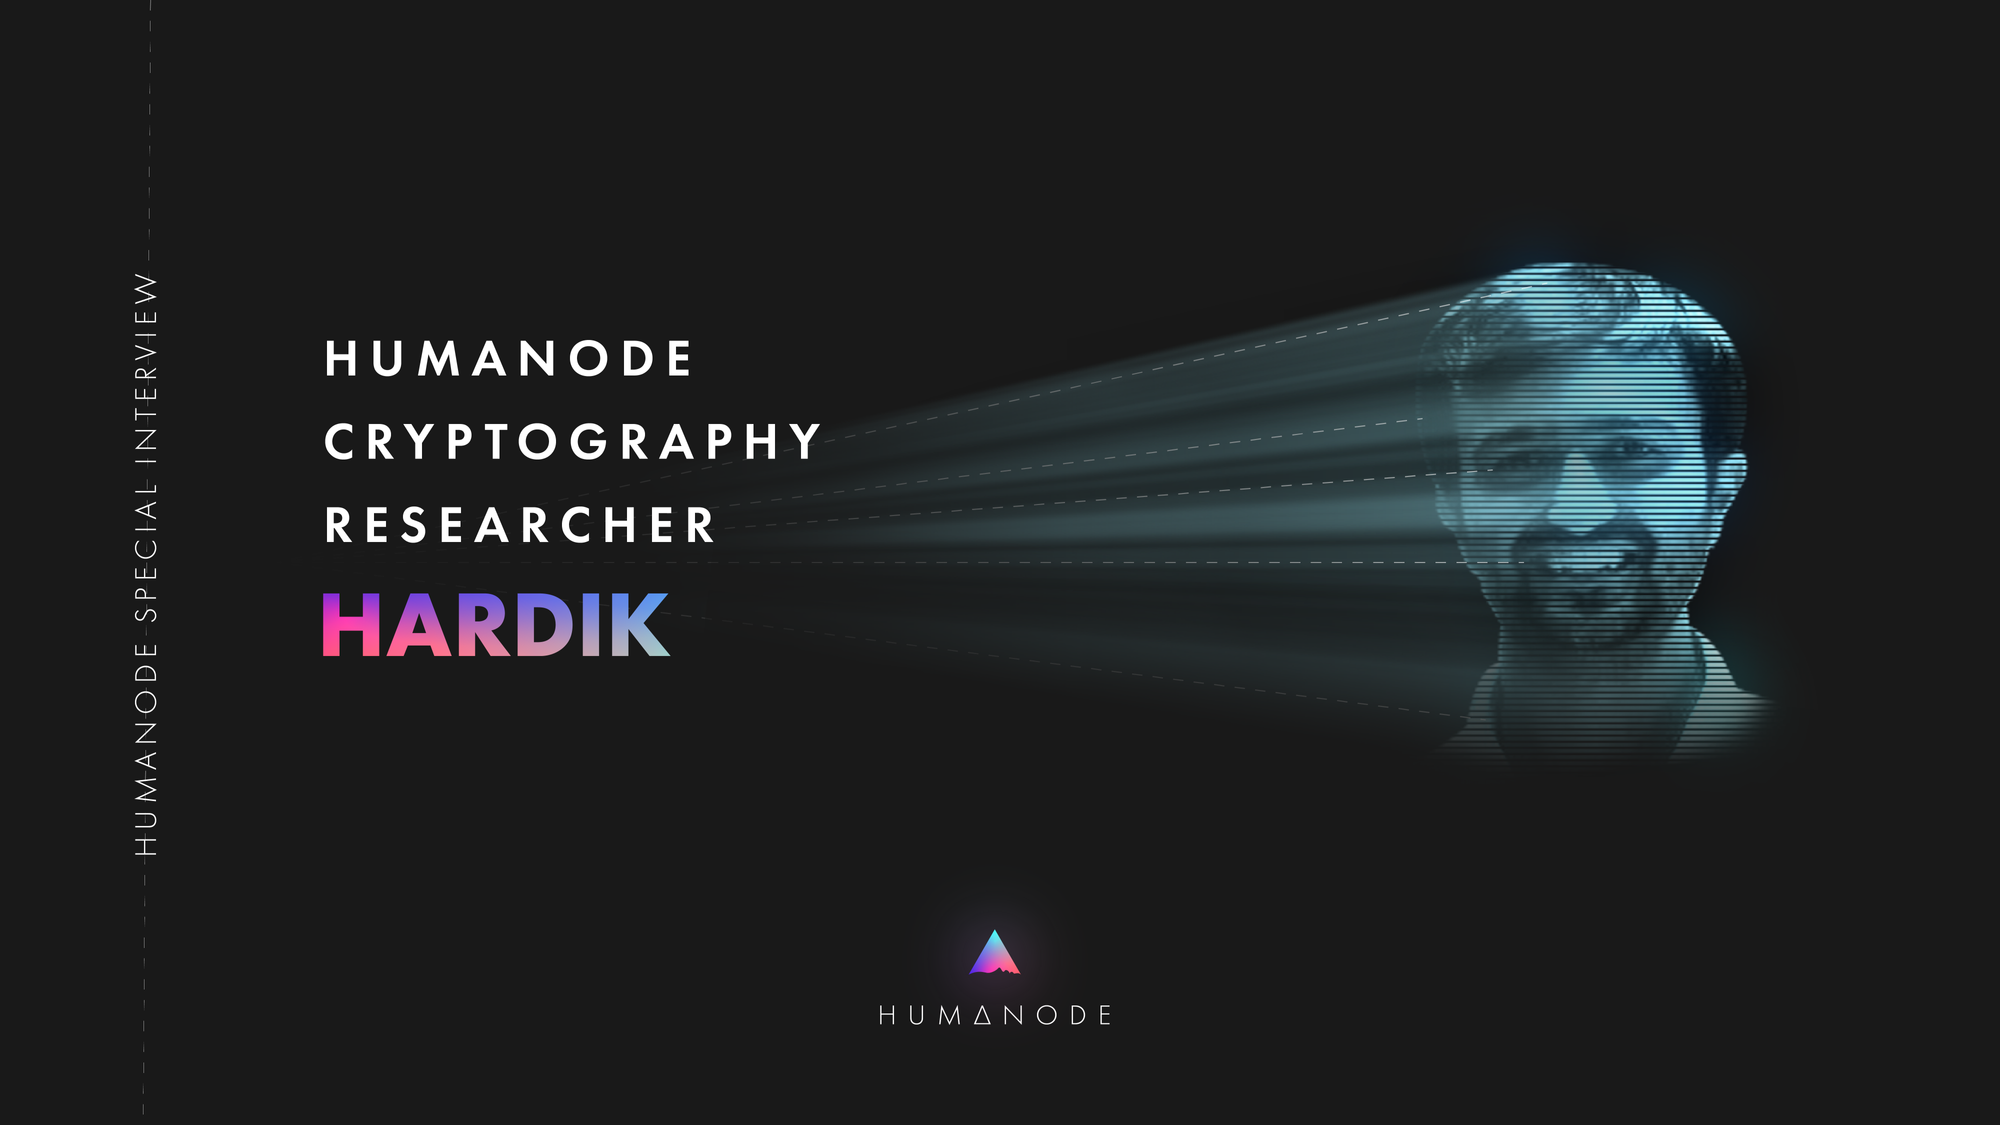 [Humanode Special Interview Series]: Hardik, cryptography researcher at Humanode